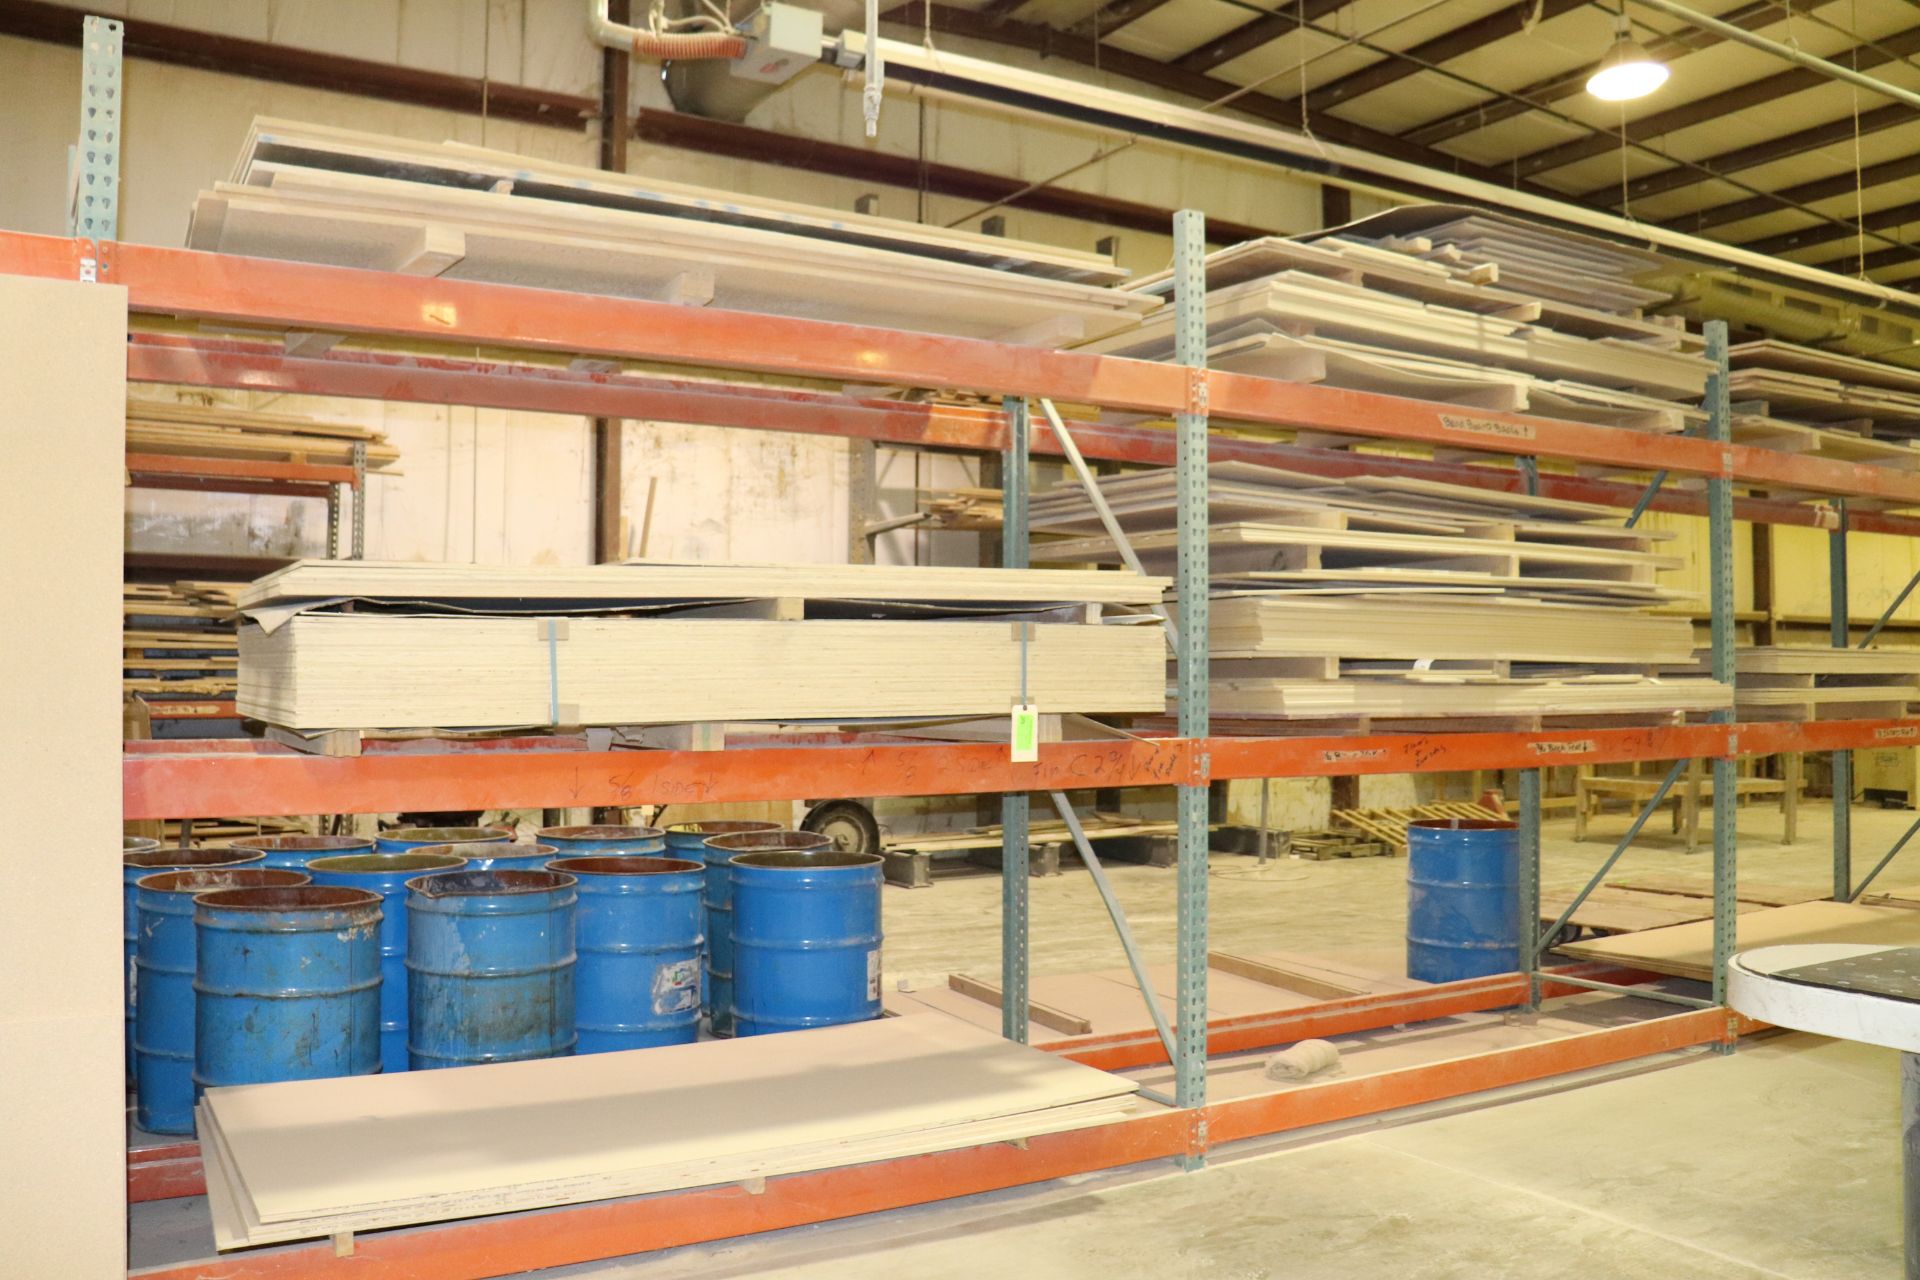 Contents of five pallet racks, 4 x 8, laminated wood stock